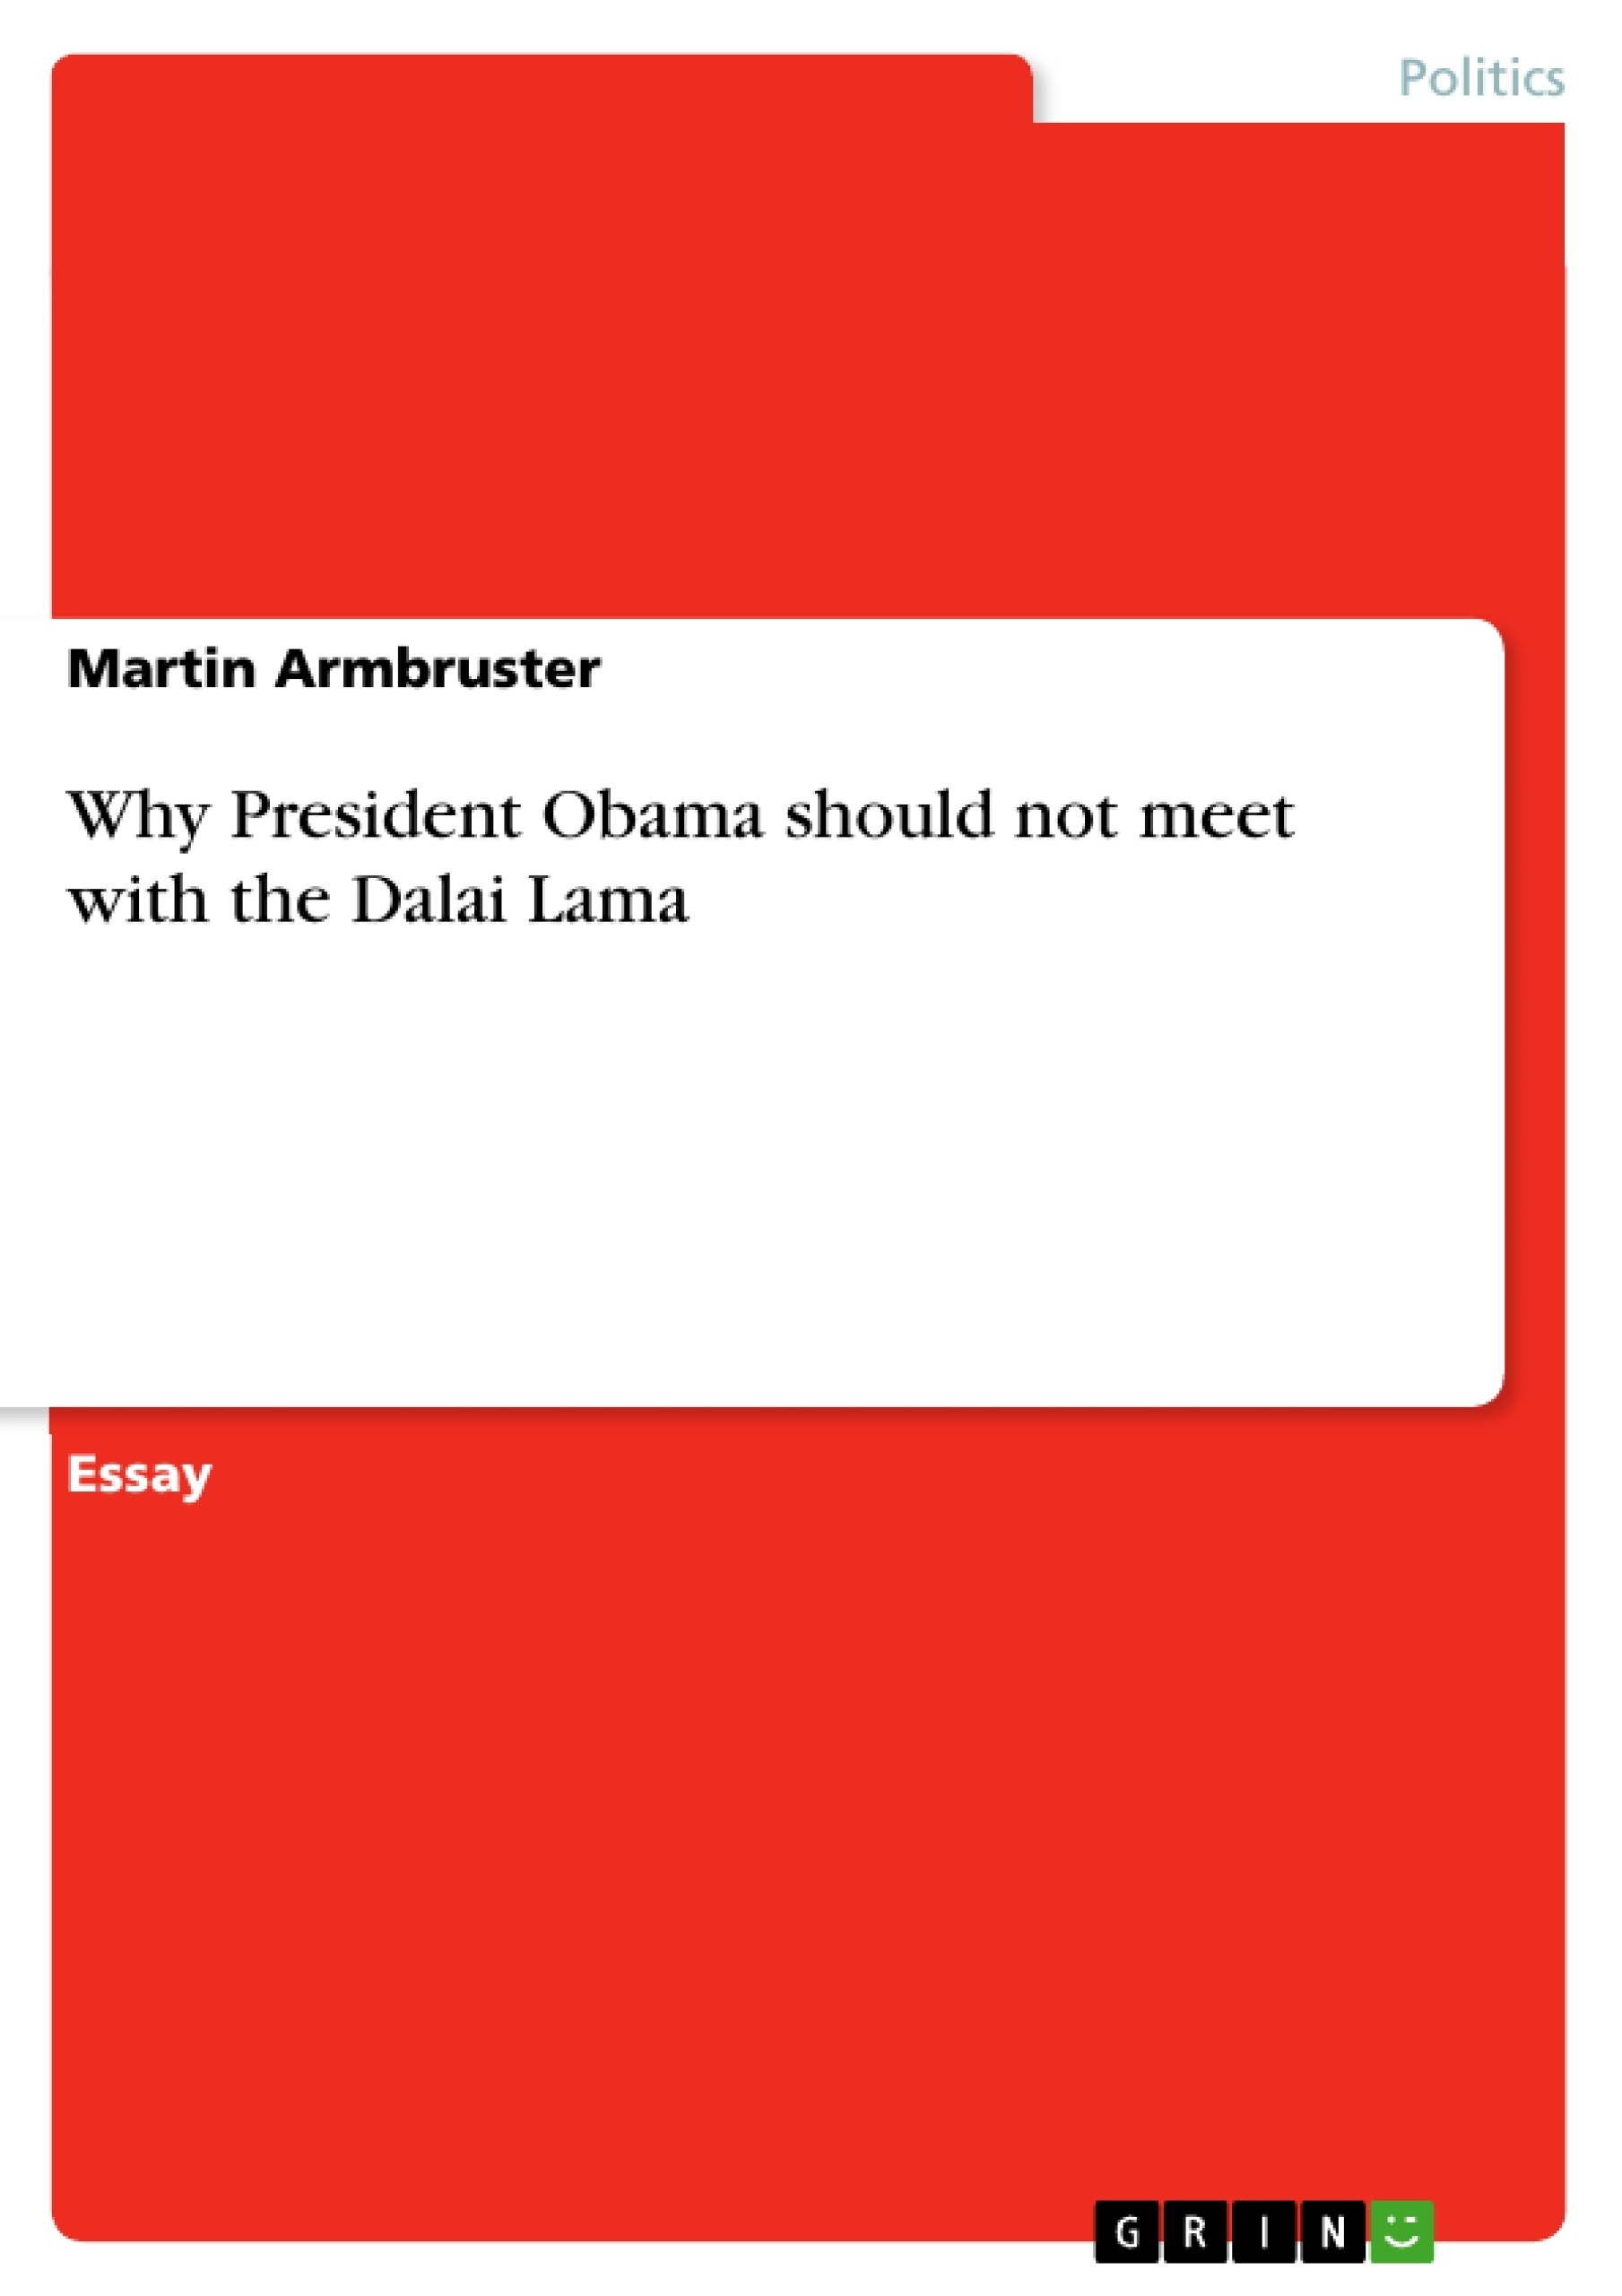 Titel: Why President Obama should not meet with the Dalai Lama